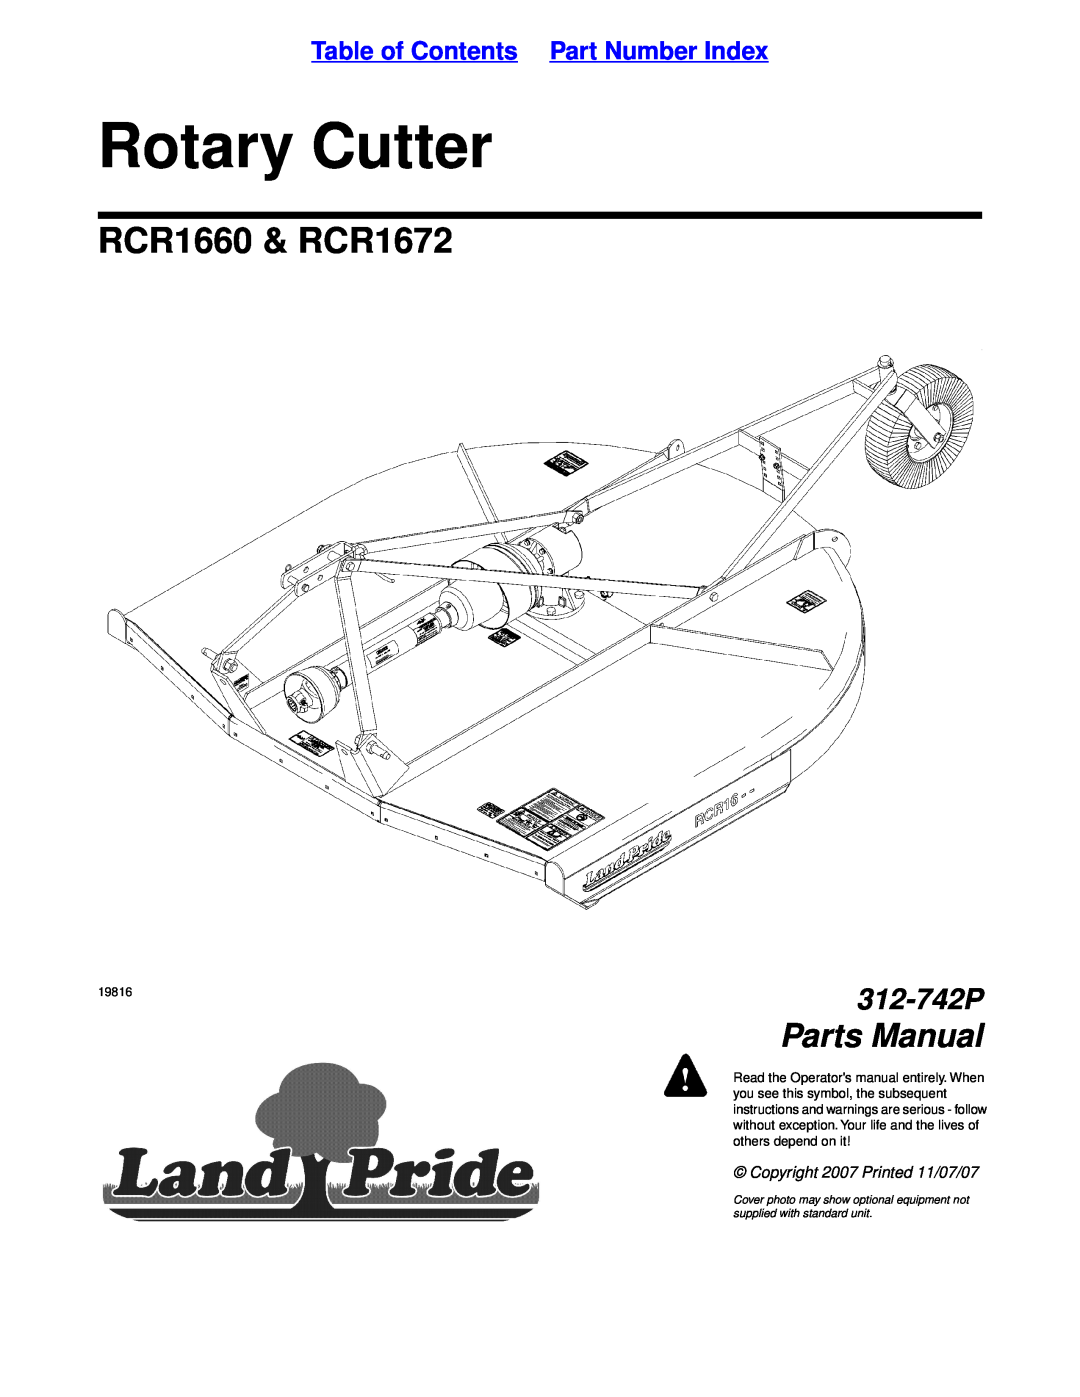 Land Pride manual Table of Contents Part Number Index, Rotary Cutter, RCR1660 & RCR1672, Parts Manual, 312-742P 